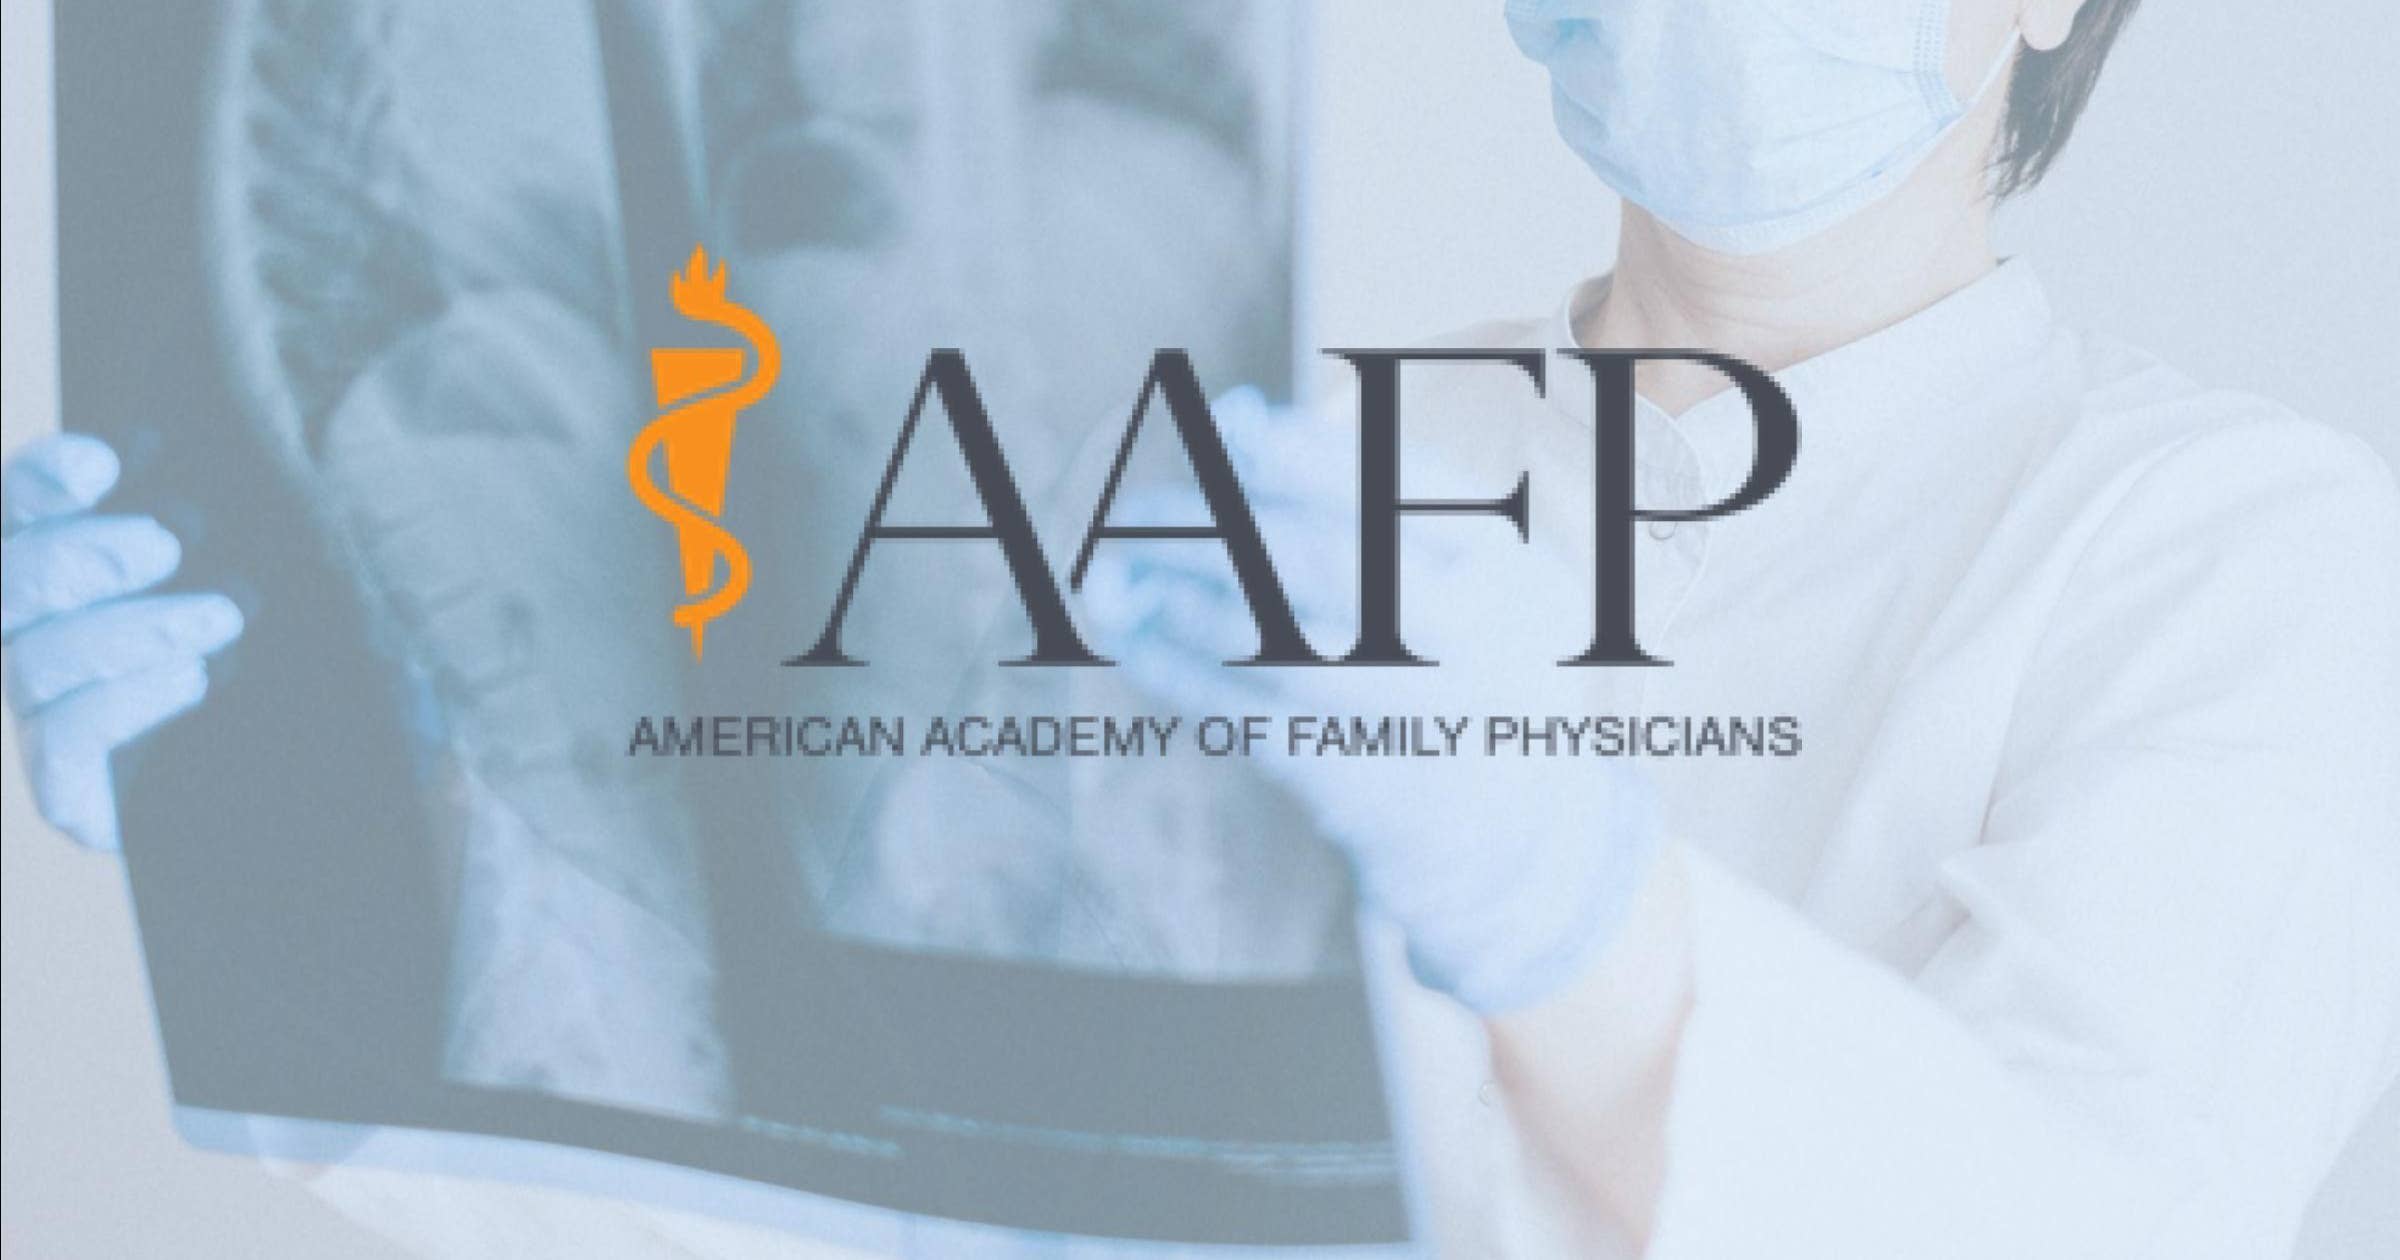 American Academy of Family Physicians (AAFP)